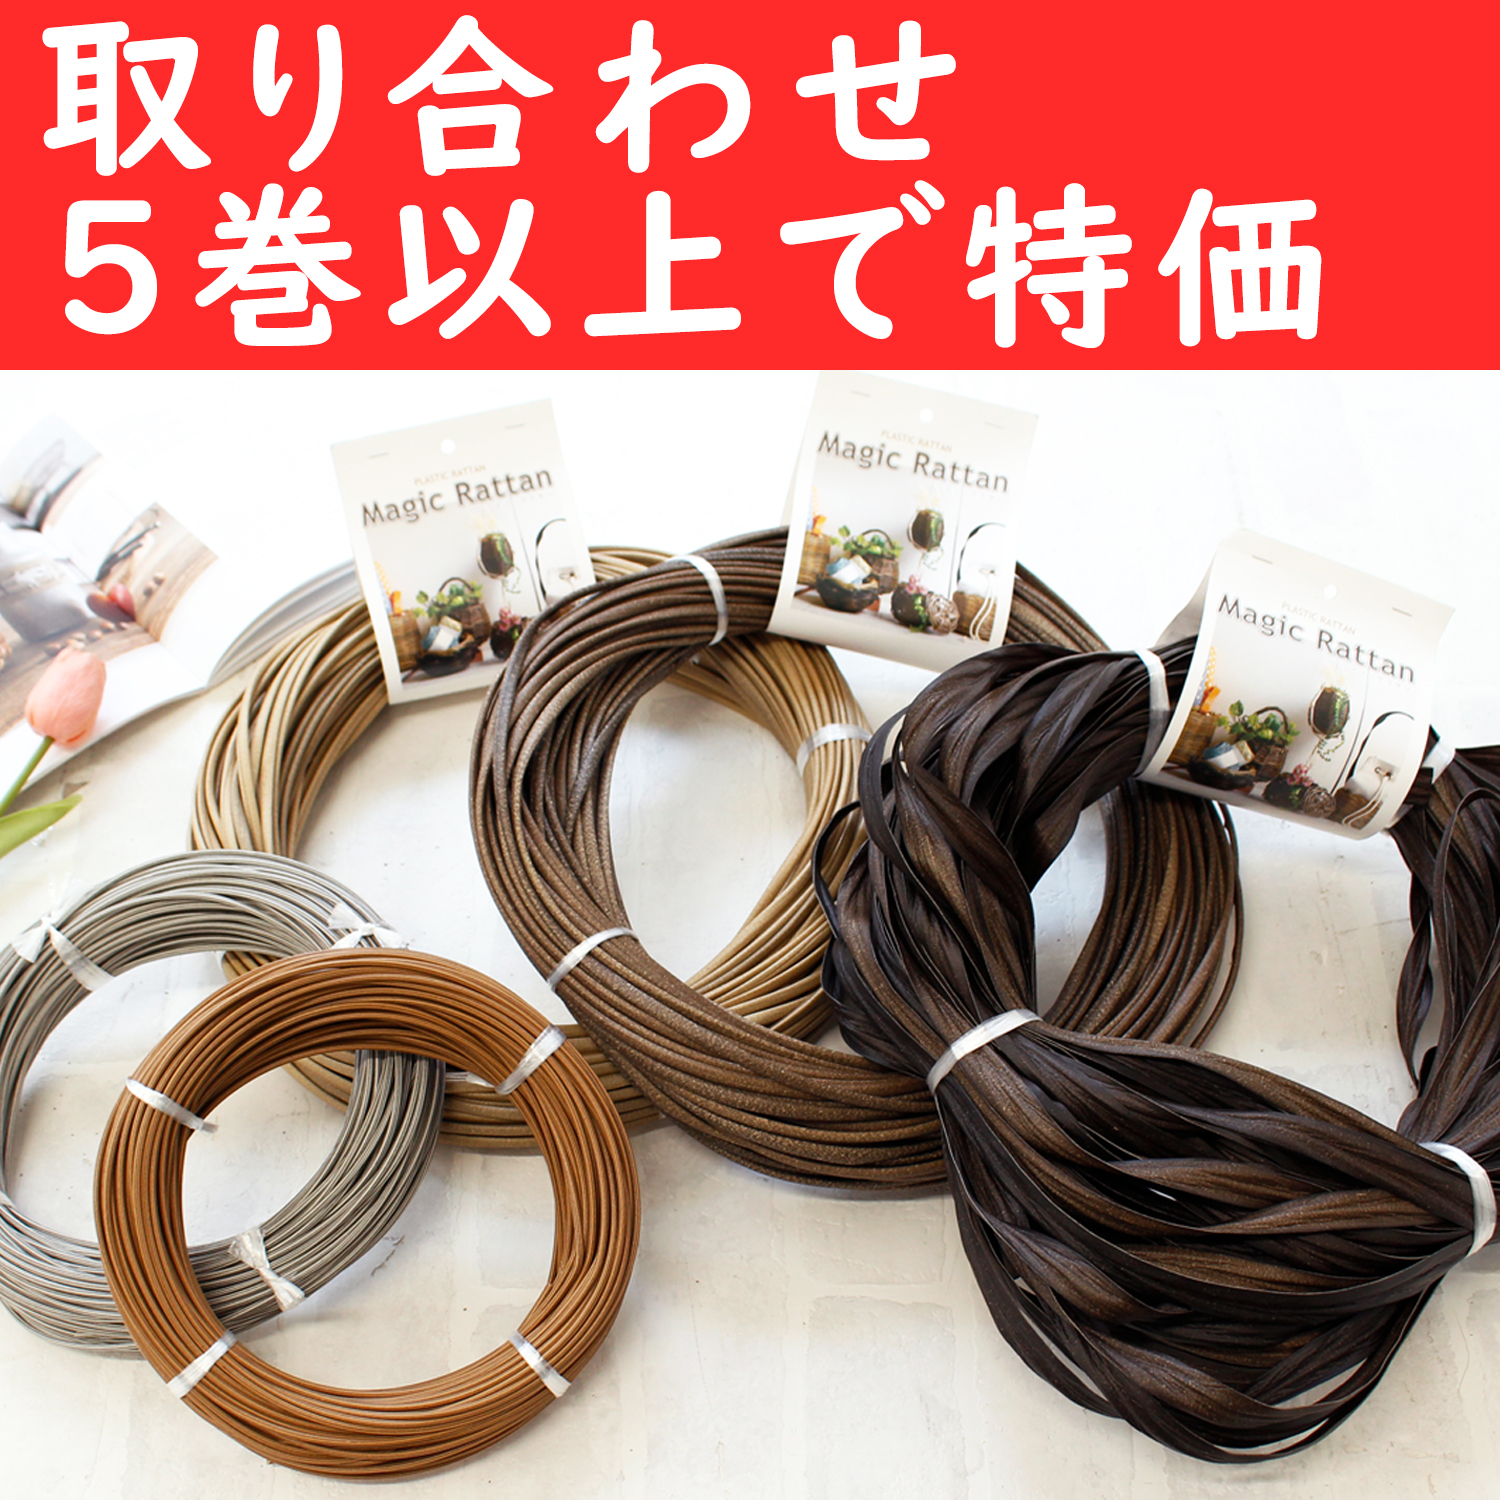 MLC-OVER5 plastic rattan "Magic rattan" approx. 50m roll Special price on combinations 5 or more (roll)